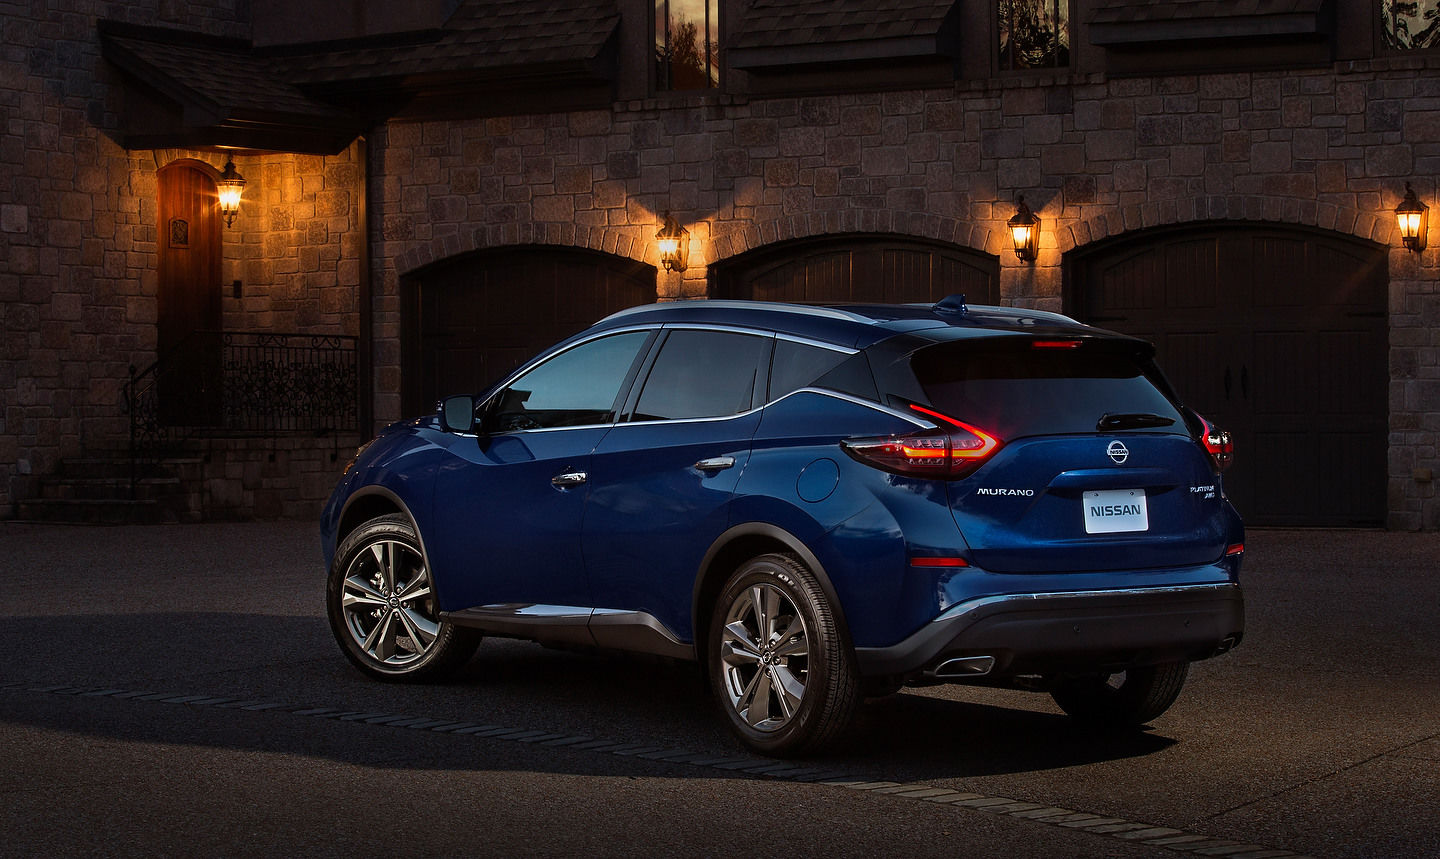 2019 Nissan Murano bows at the 2018 Los Angeles Auto Show